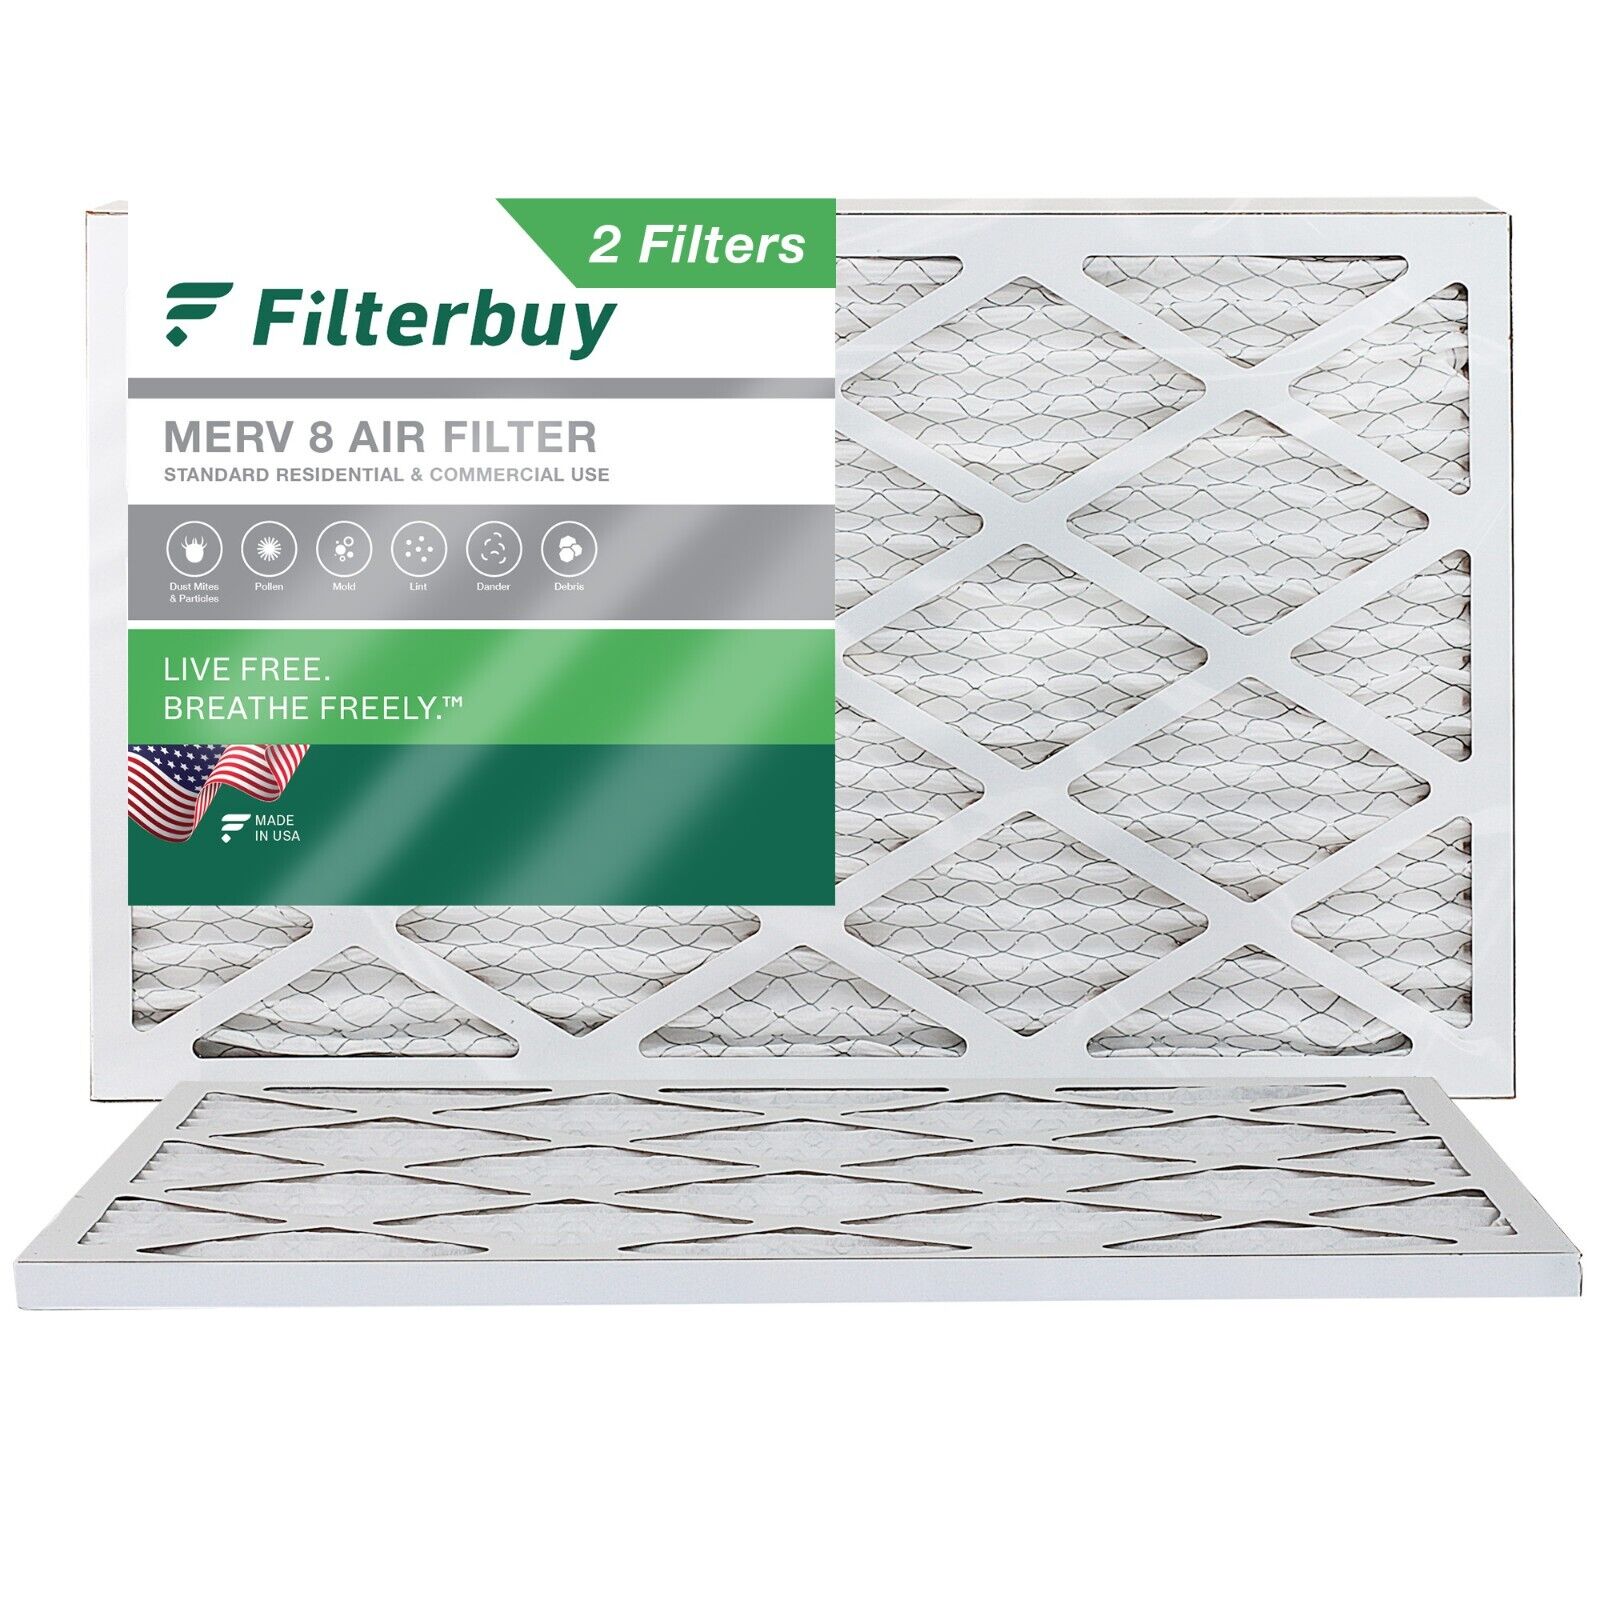 Filterbuy 16x25x1 Pleated Air Filters, Replacement for HVAC AC Furnace (MERV 8)